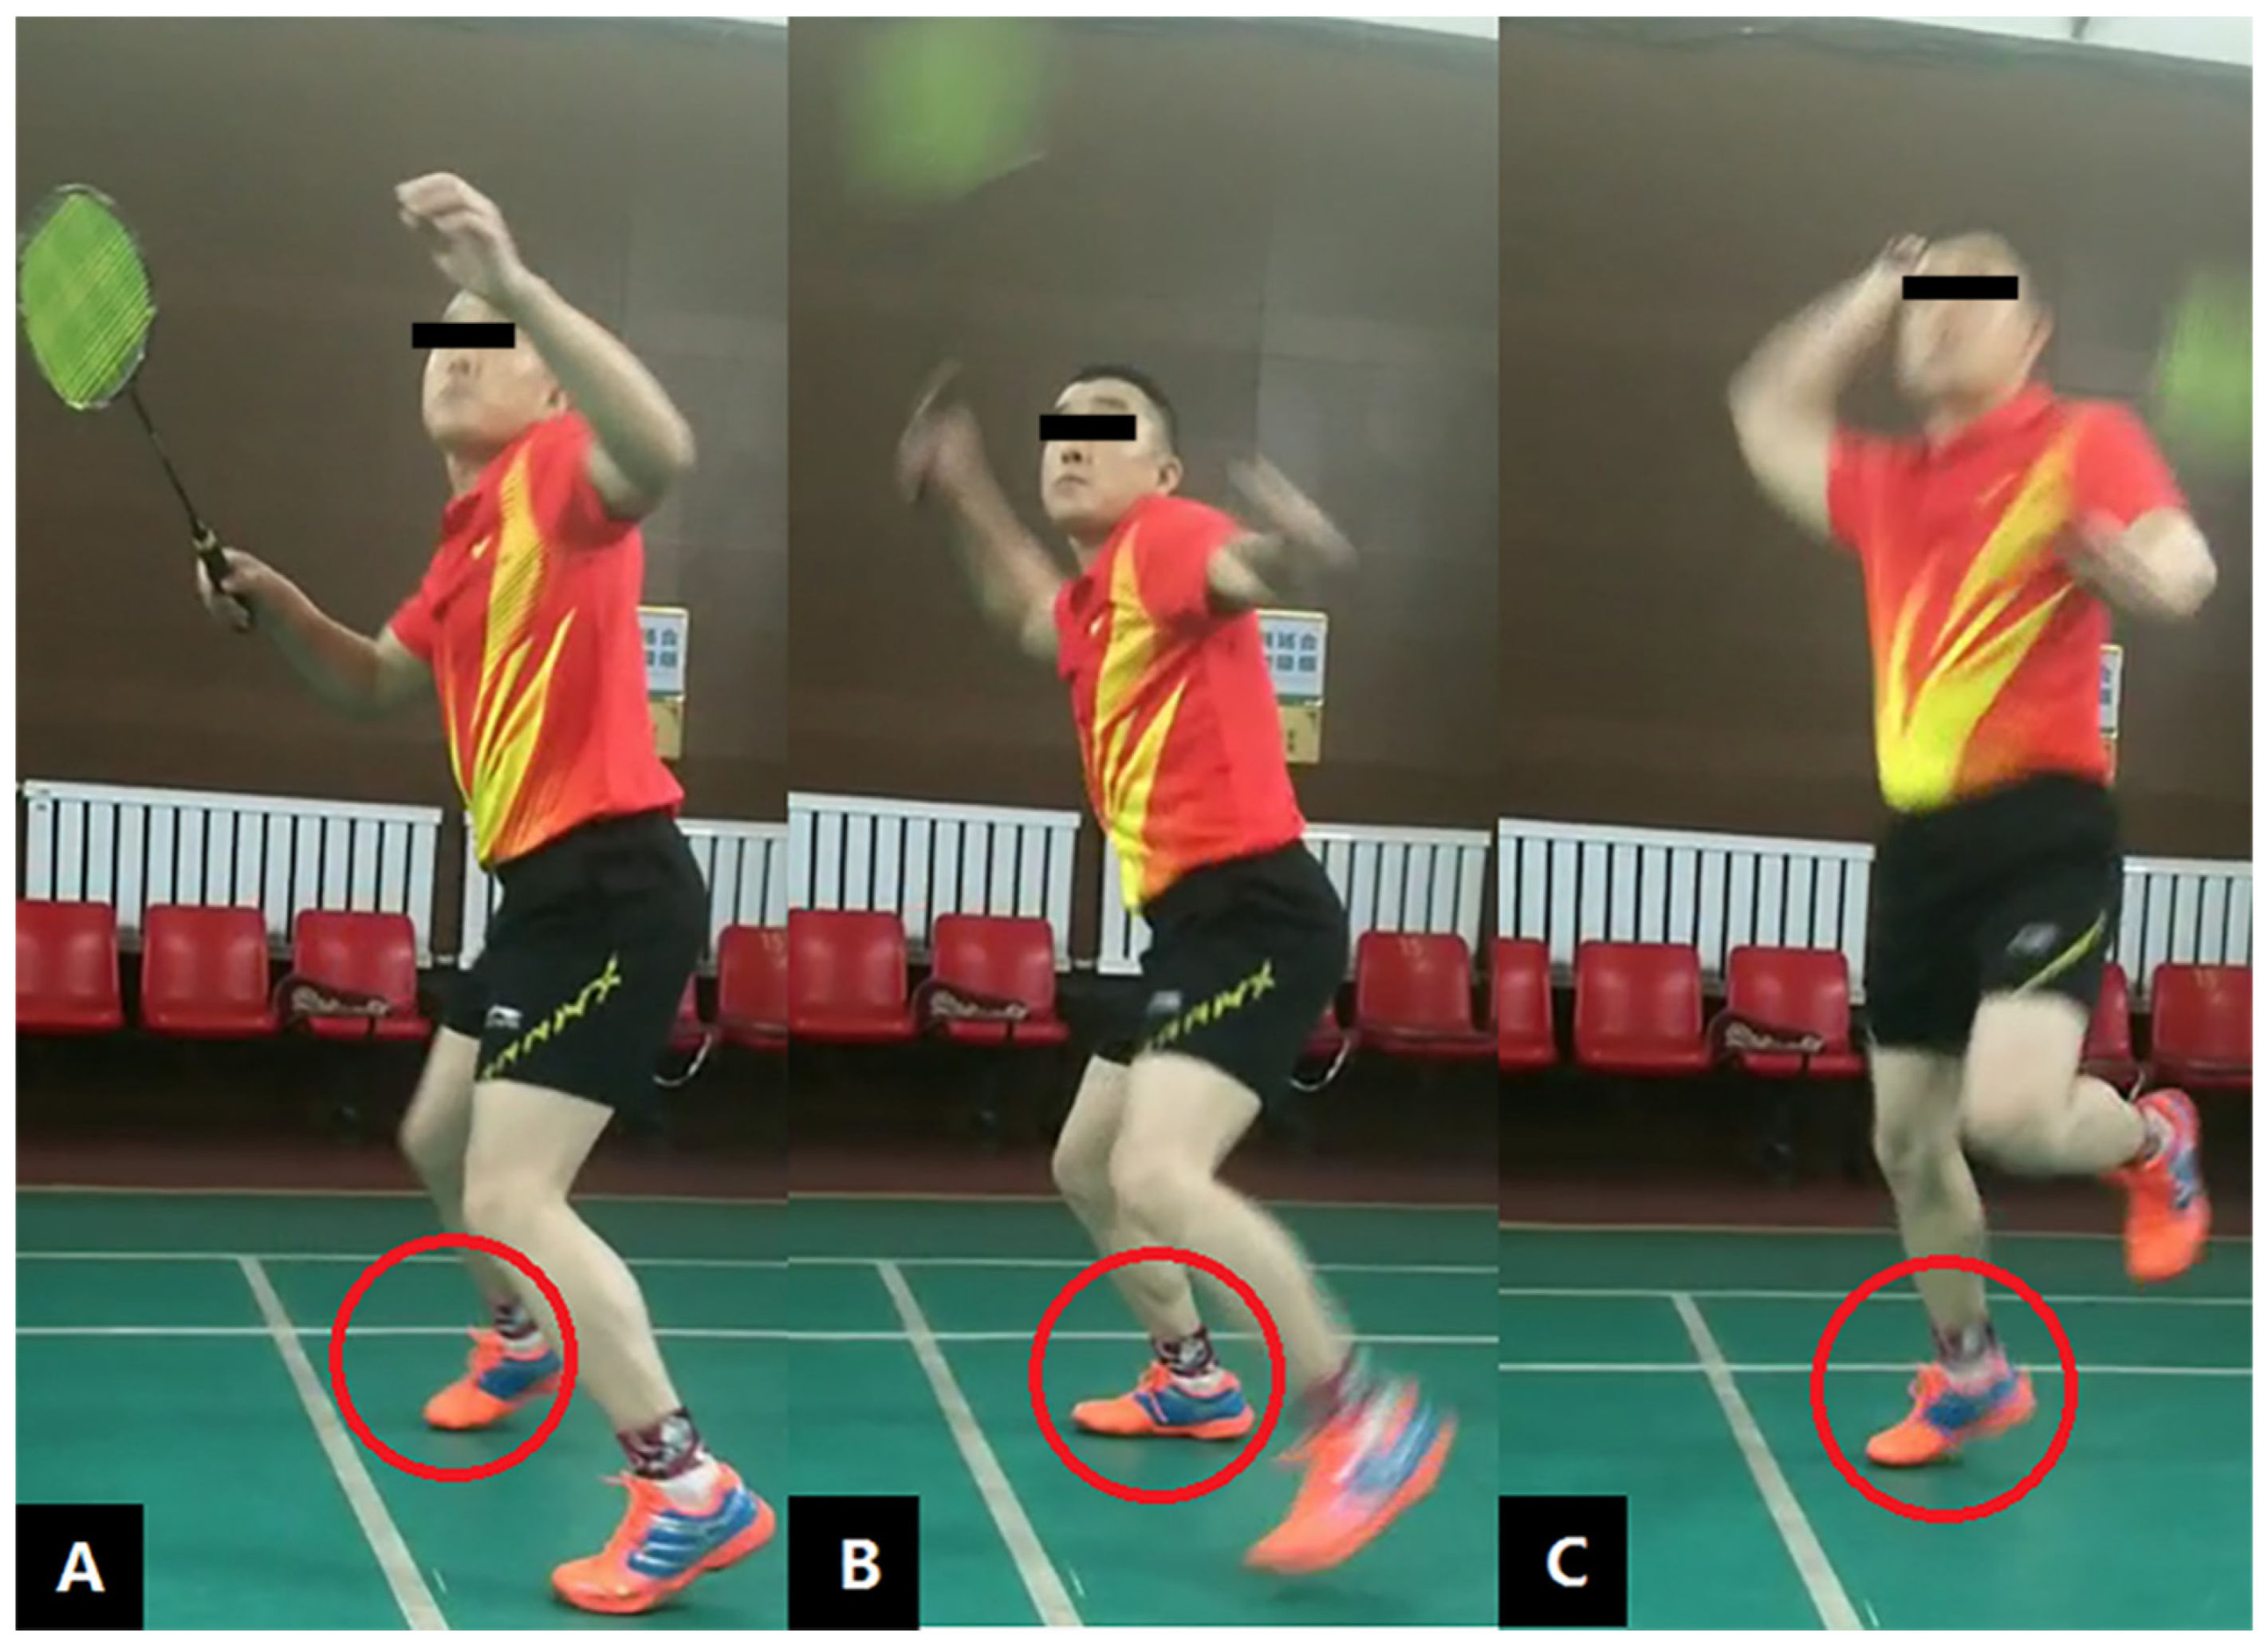 Biology | Free Full-Text | Biomechanical Analysis on Skilled Badminton  Players during Take-Off Phase in Forehand Overhead Strokes: A Pilot Study